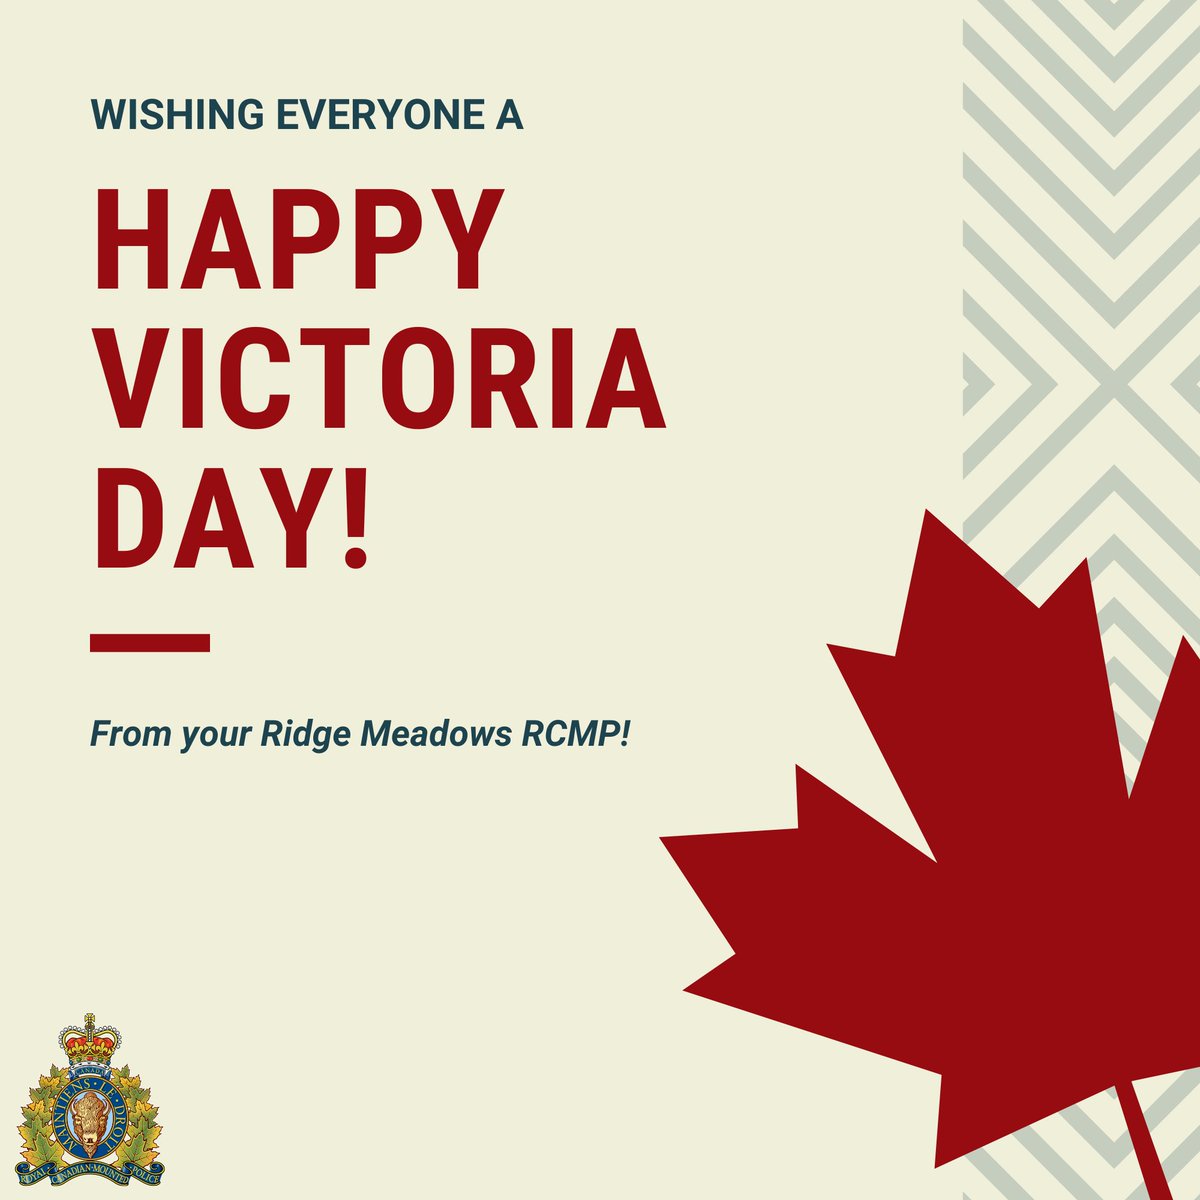 Hey Ridge Meadows, Happy Victoria Day! 👑 Don't forget to stay safe! #MayLongWeekend